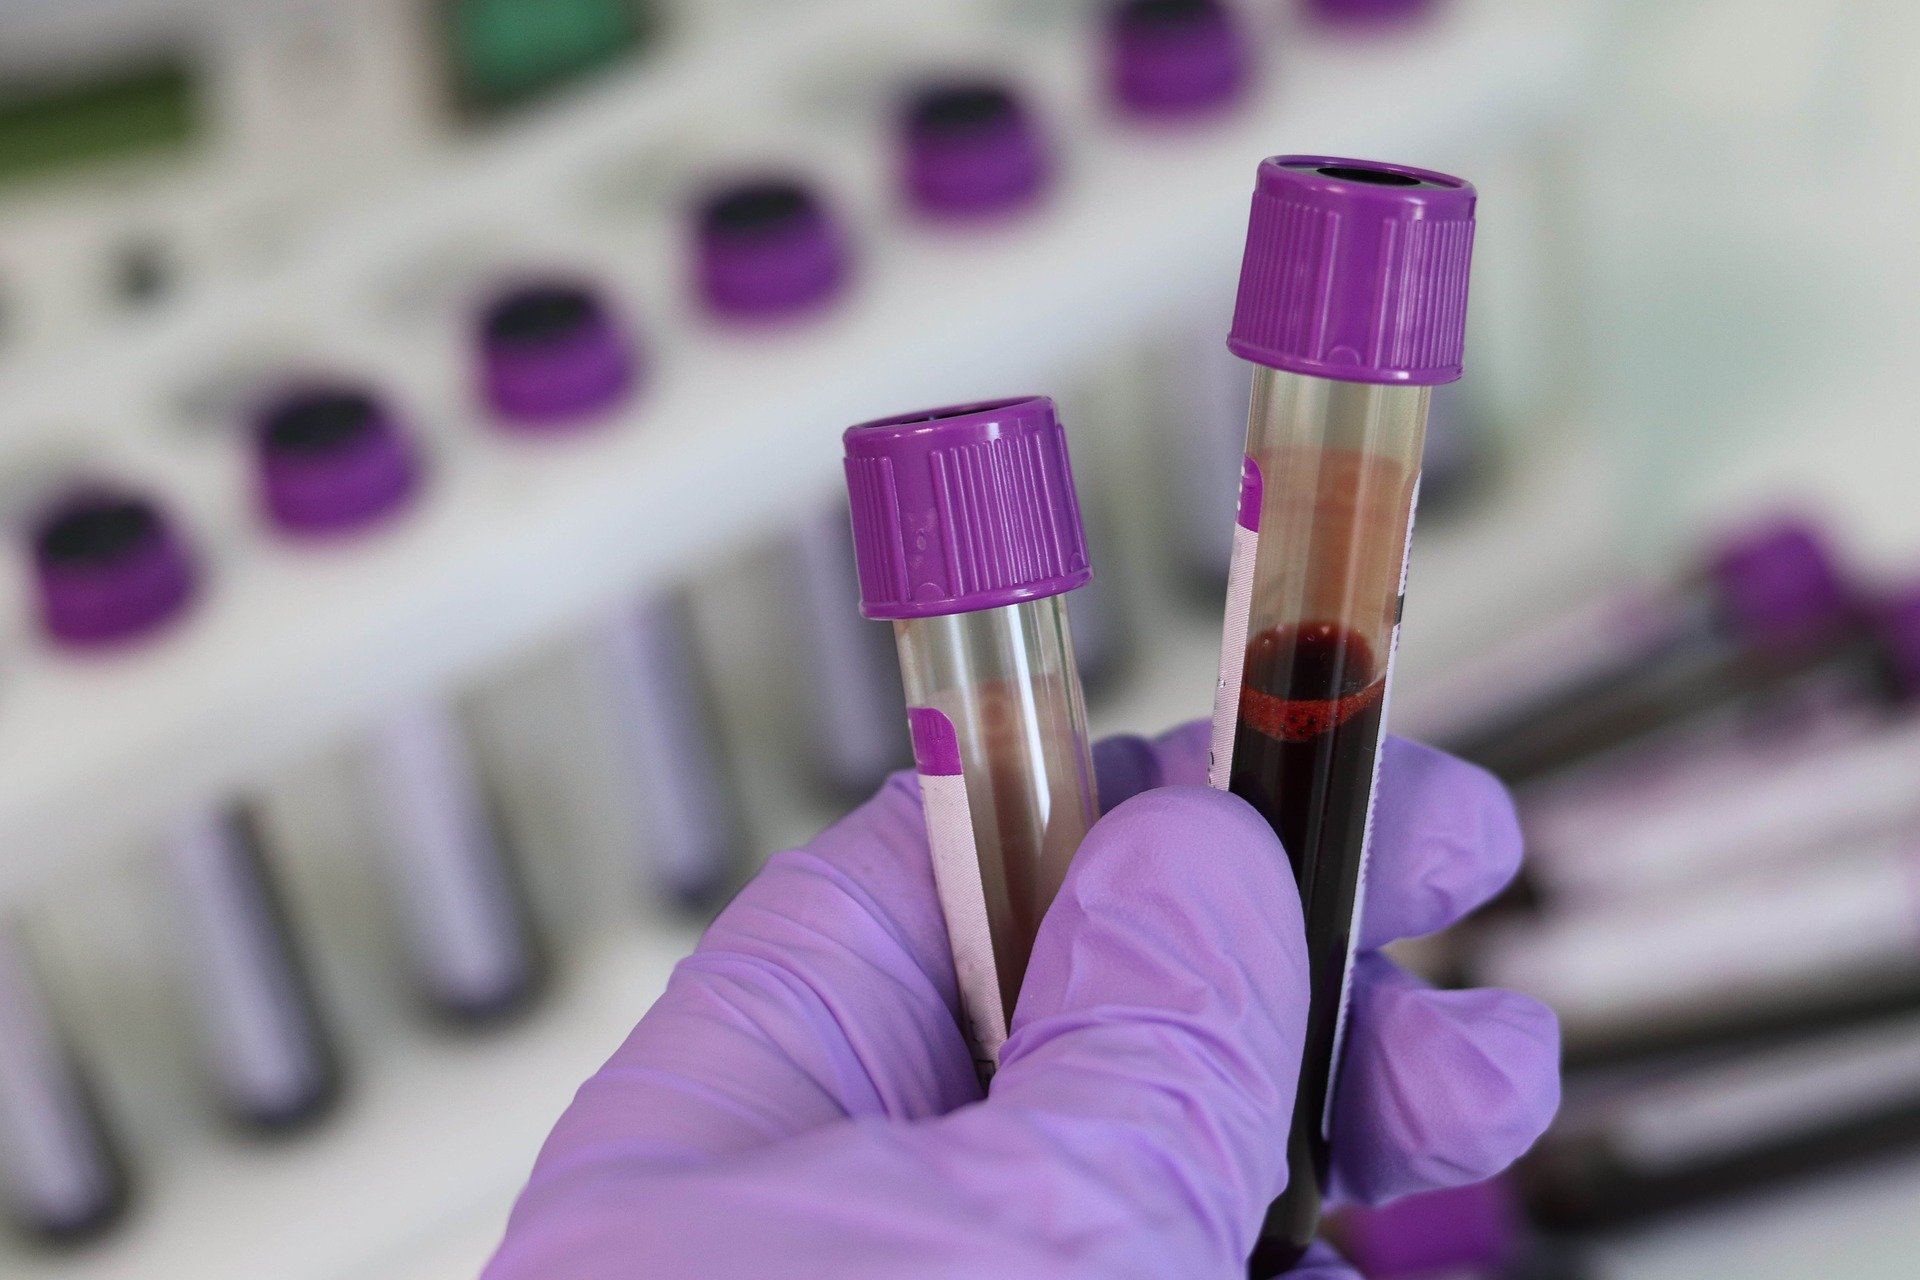 NEWS | Hereford Medical Group warns of shortages that mean that only urgent blood tests can be carried out